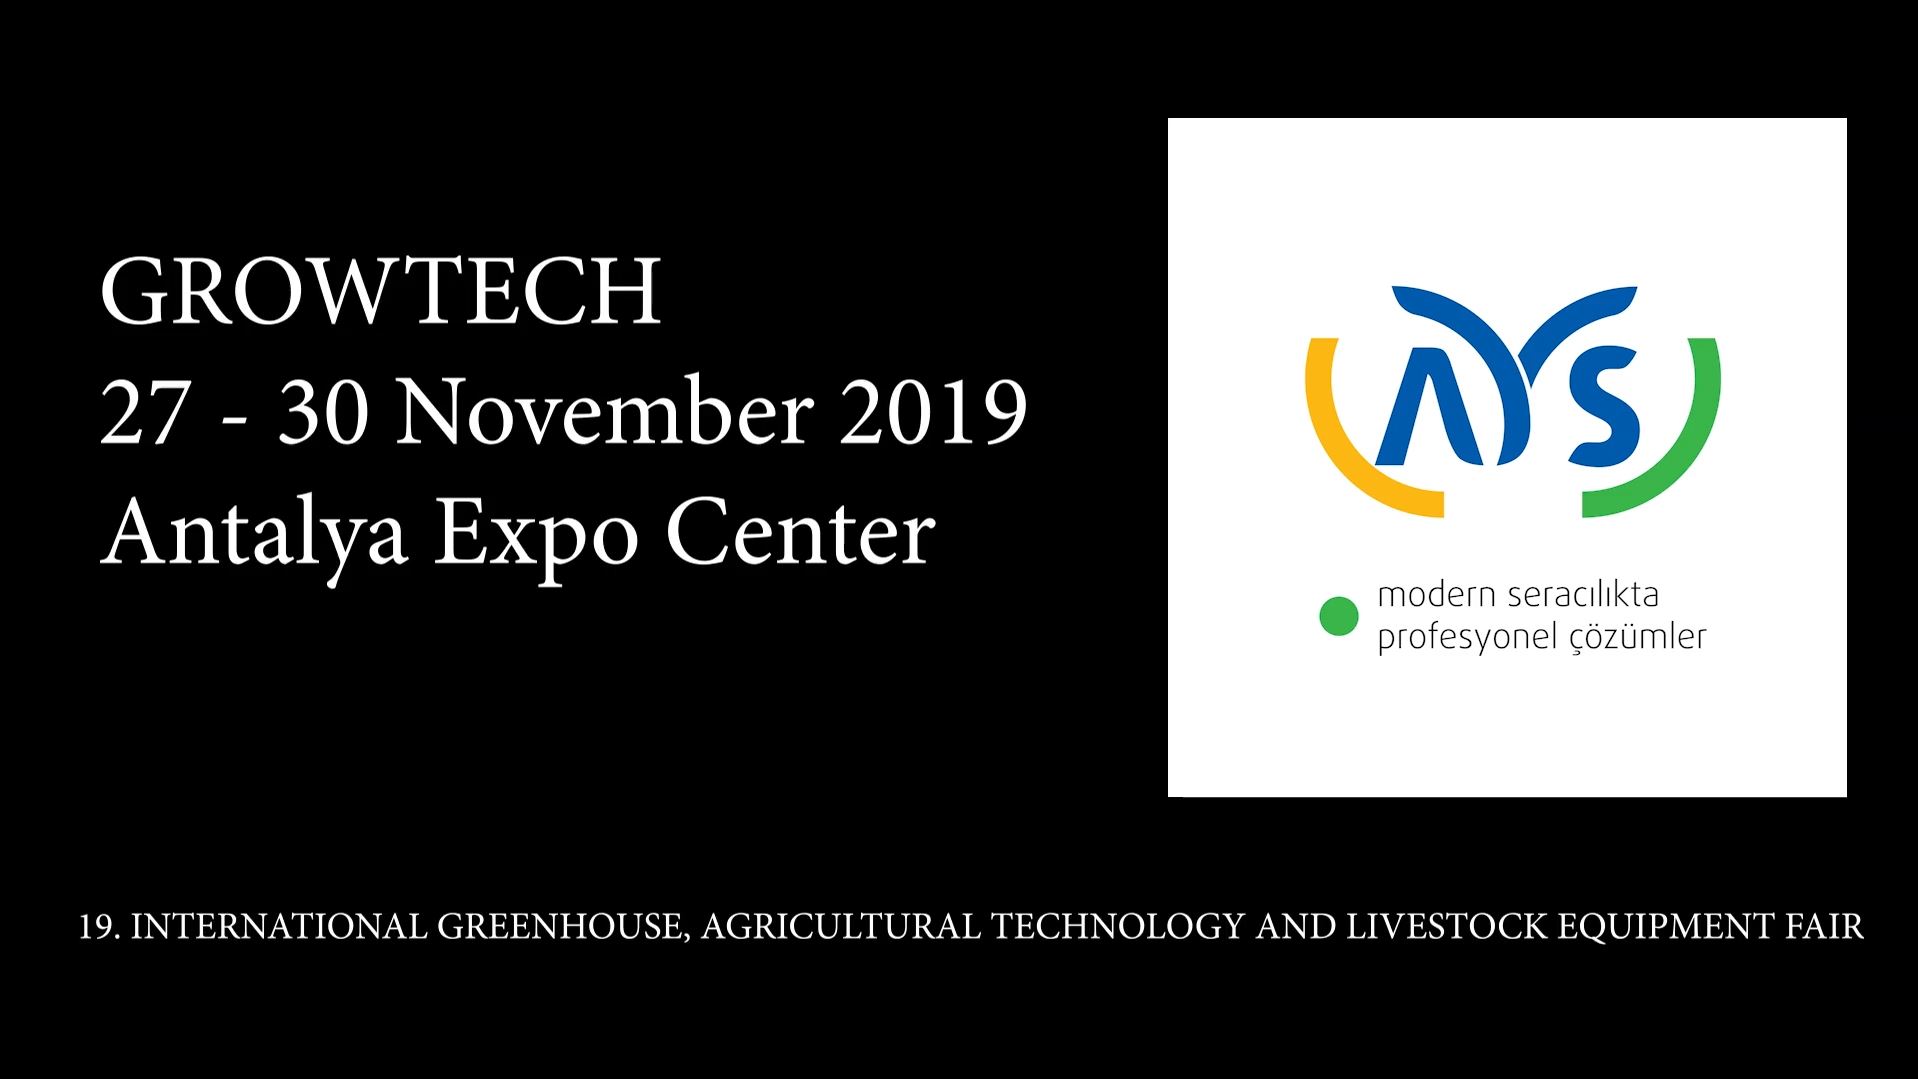 We have reached a record number of visitors at Growtech 2019